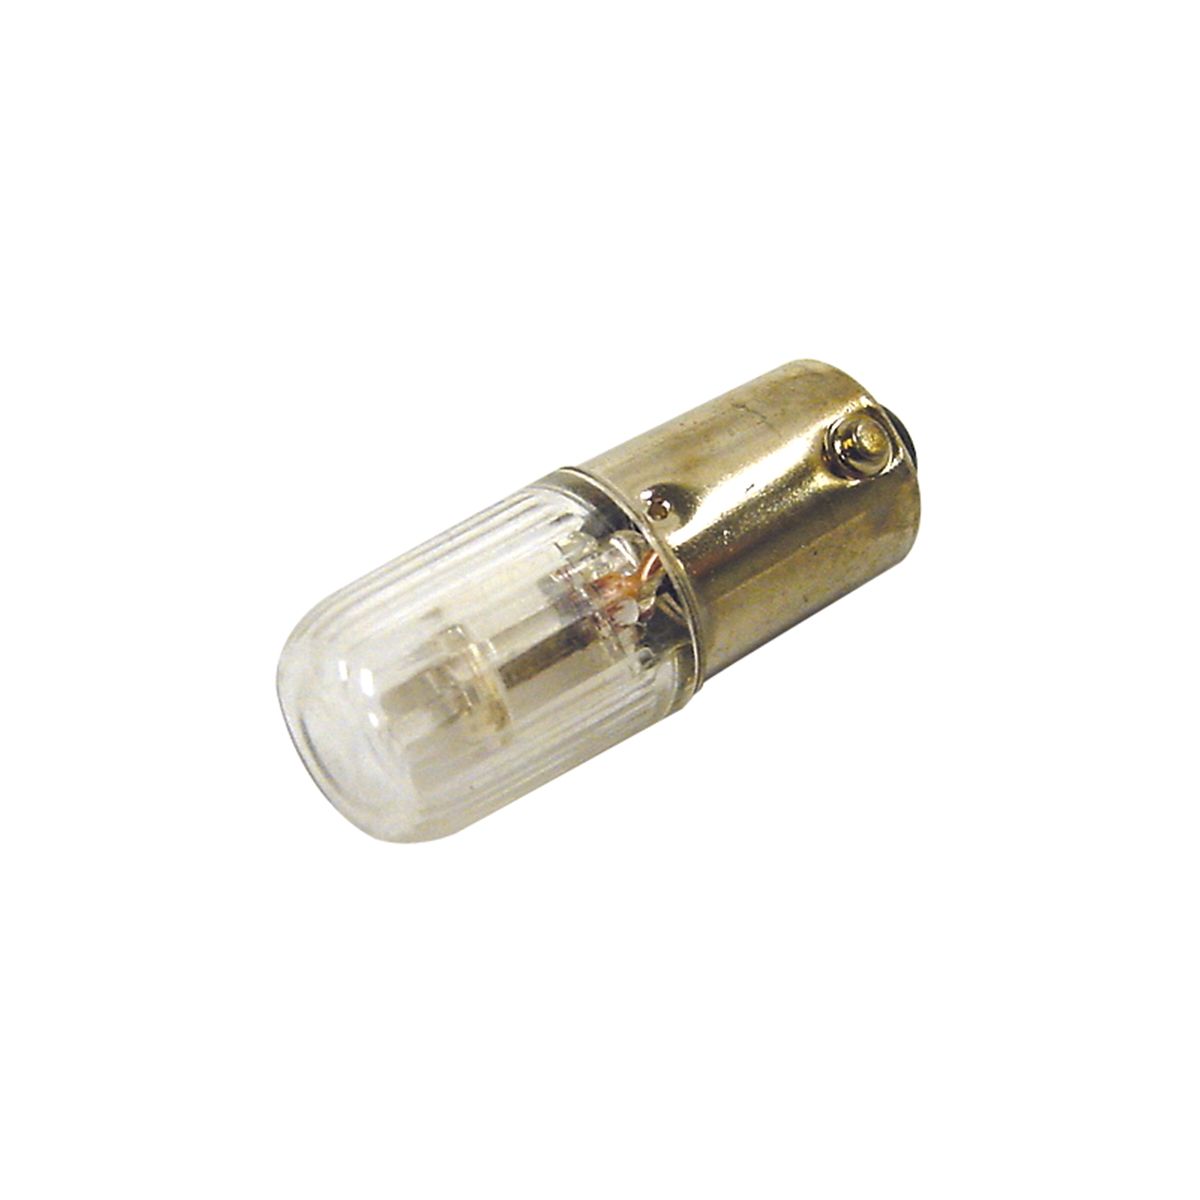 Replacement Bulb For Model 23900 Spark Checker